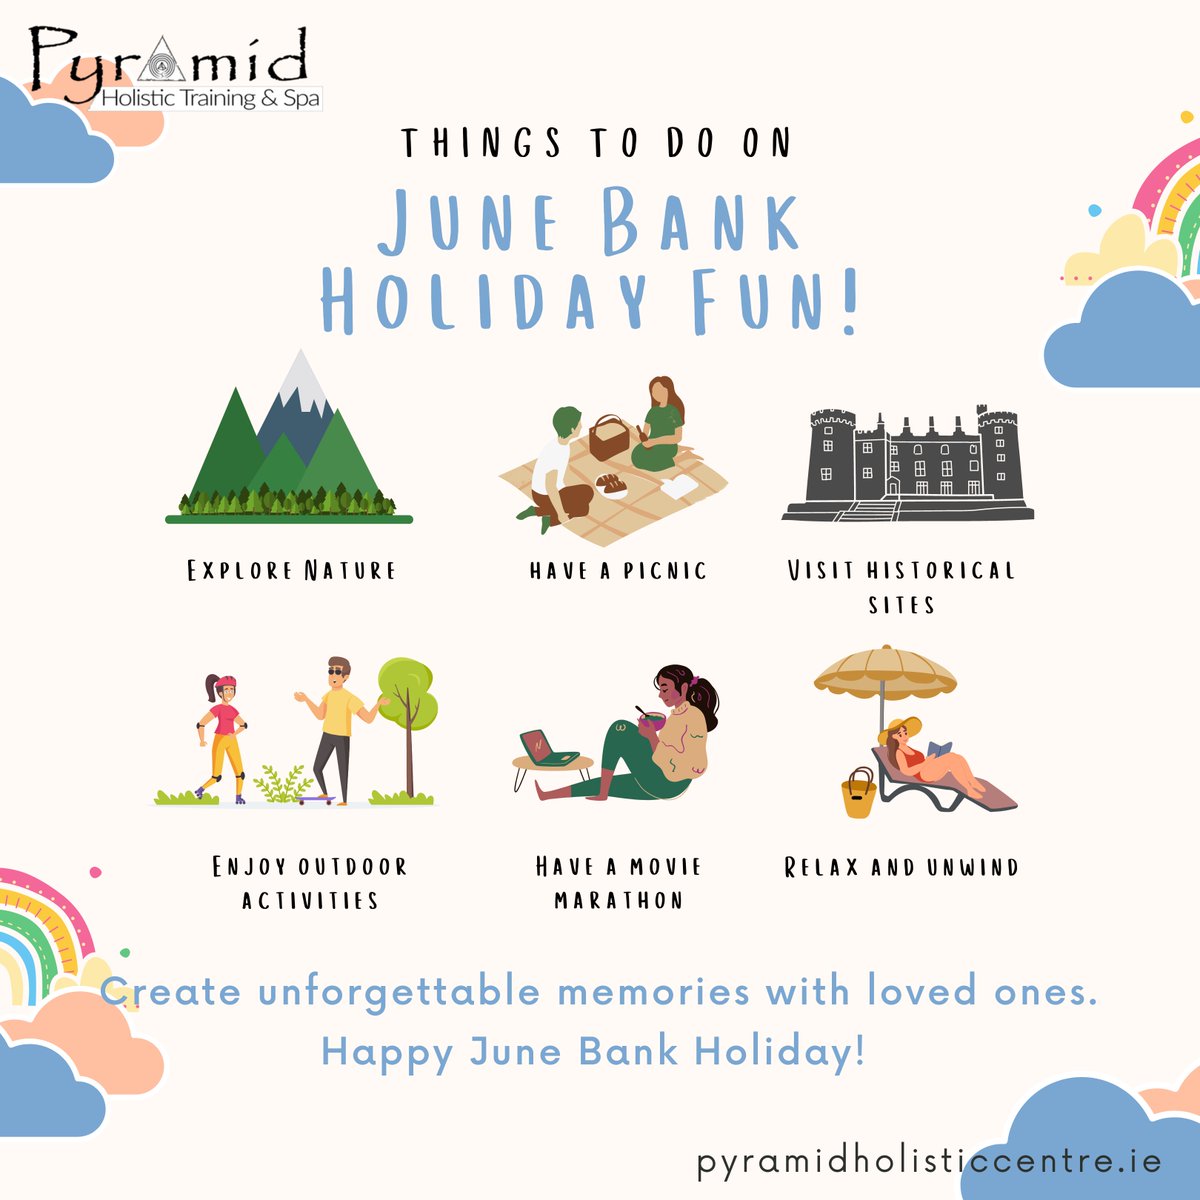 🌞✨Happy June Bank Holiday! It's the perfect time to make incredible memories! Here are some fun things to do: visit historic sites, embark on outdoor adventures, and soak up the sun! ☀️🏰🌳 

#JuneBankHoliday
#WeekendVibes
#HistoricPlaces
#ExploreIreland
#holidays 
#Health